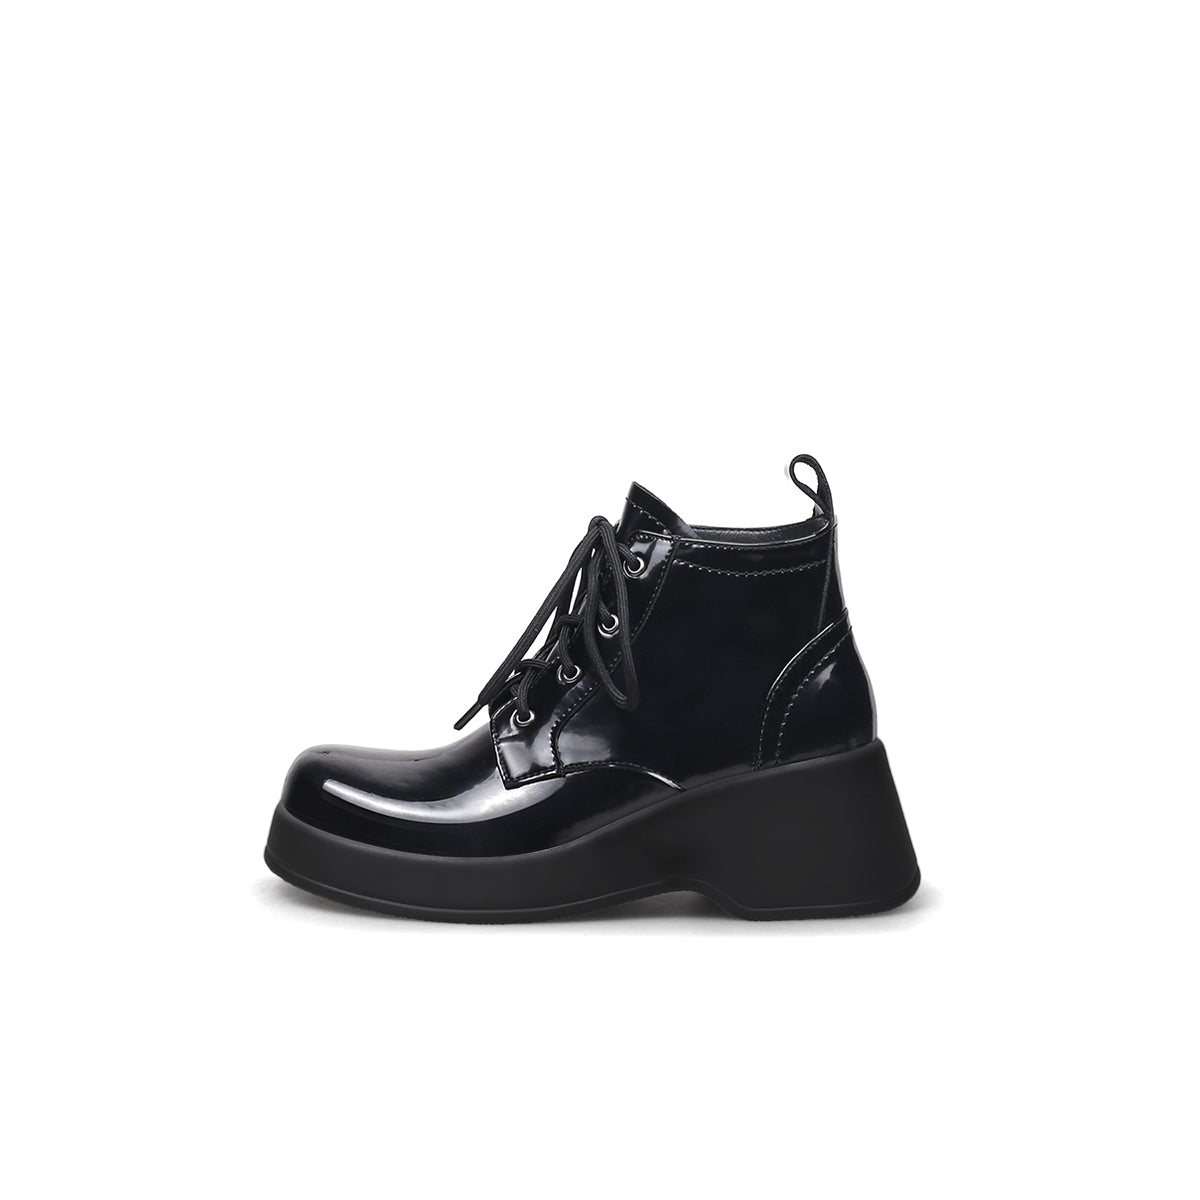 Patent Circular Arc Lace-up Black Boots